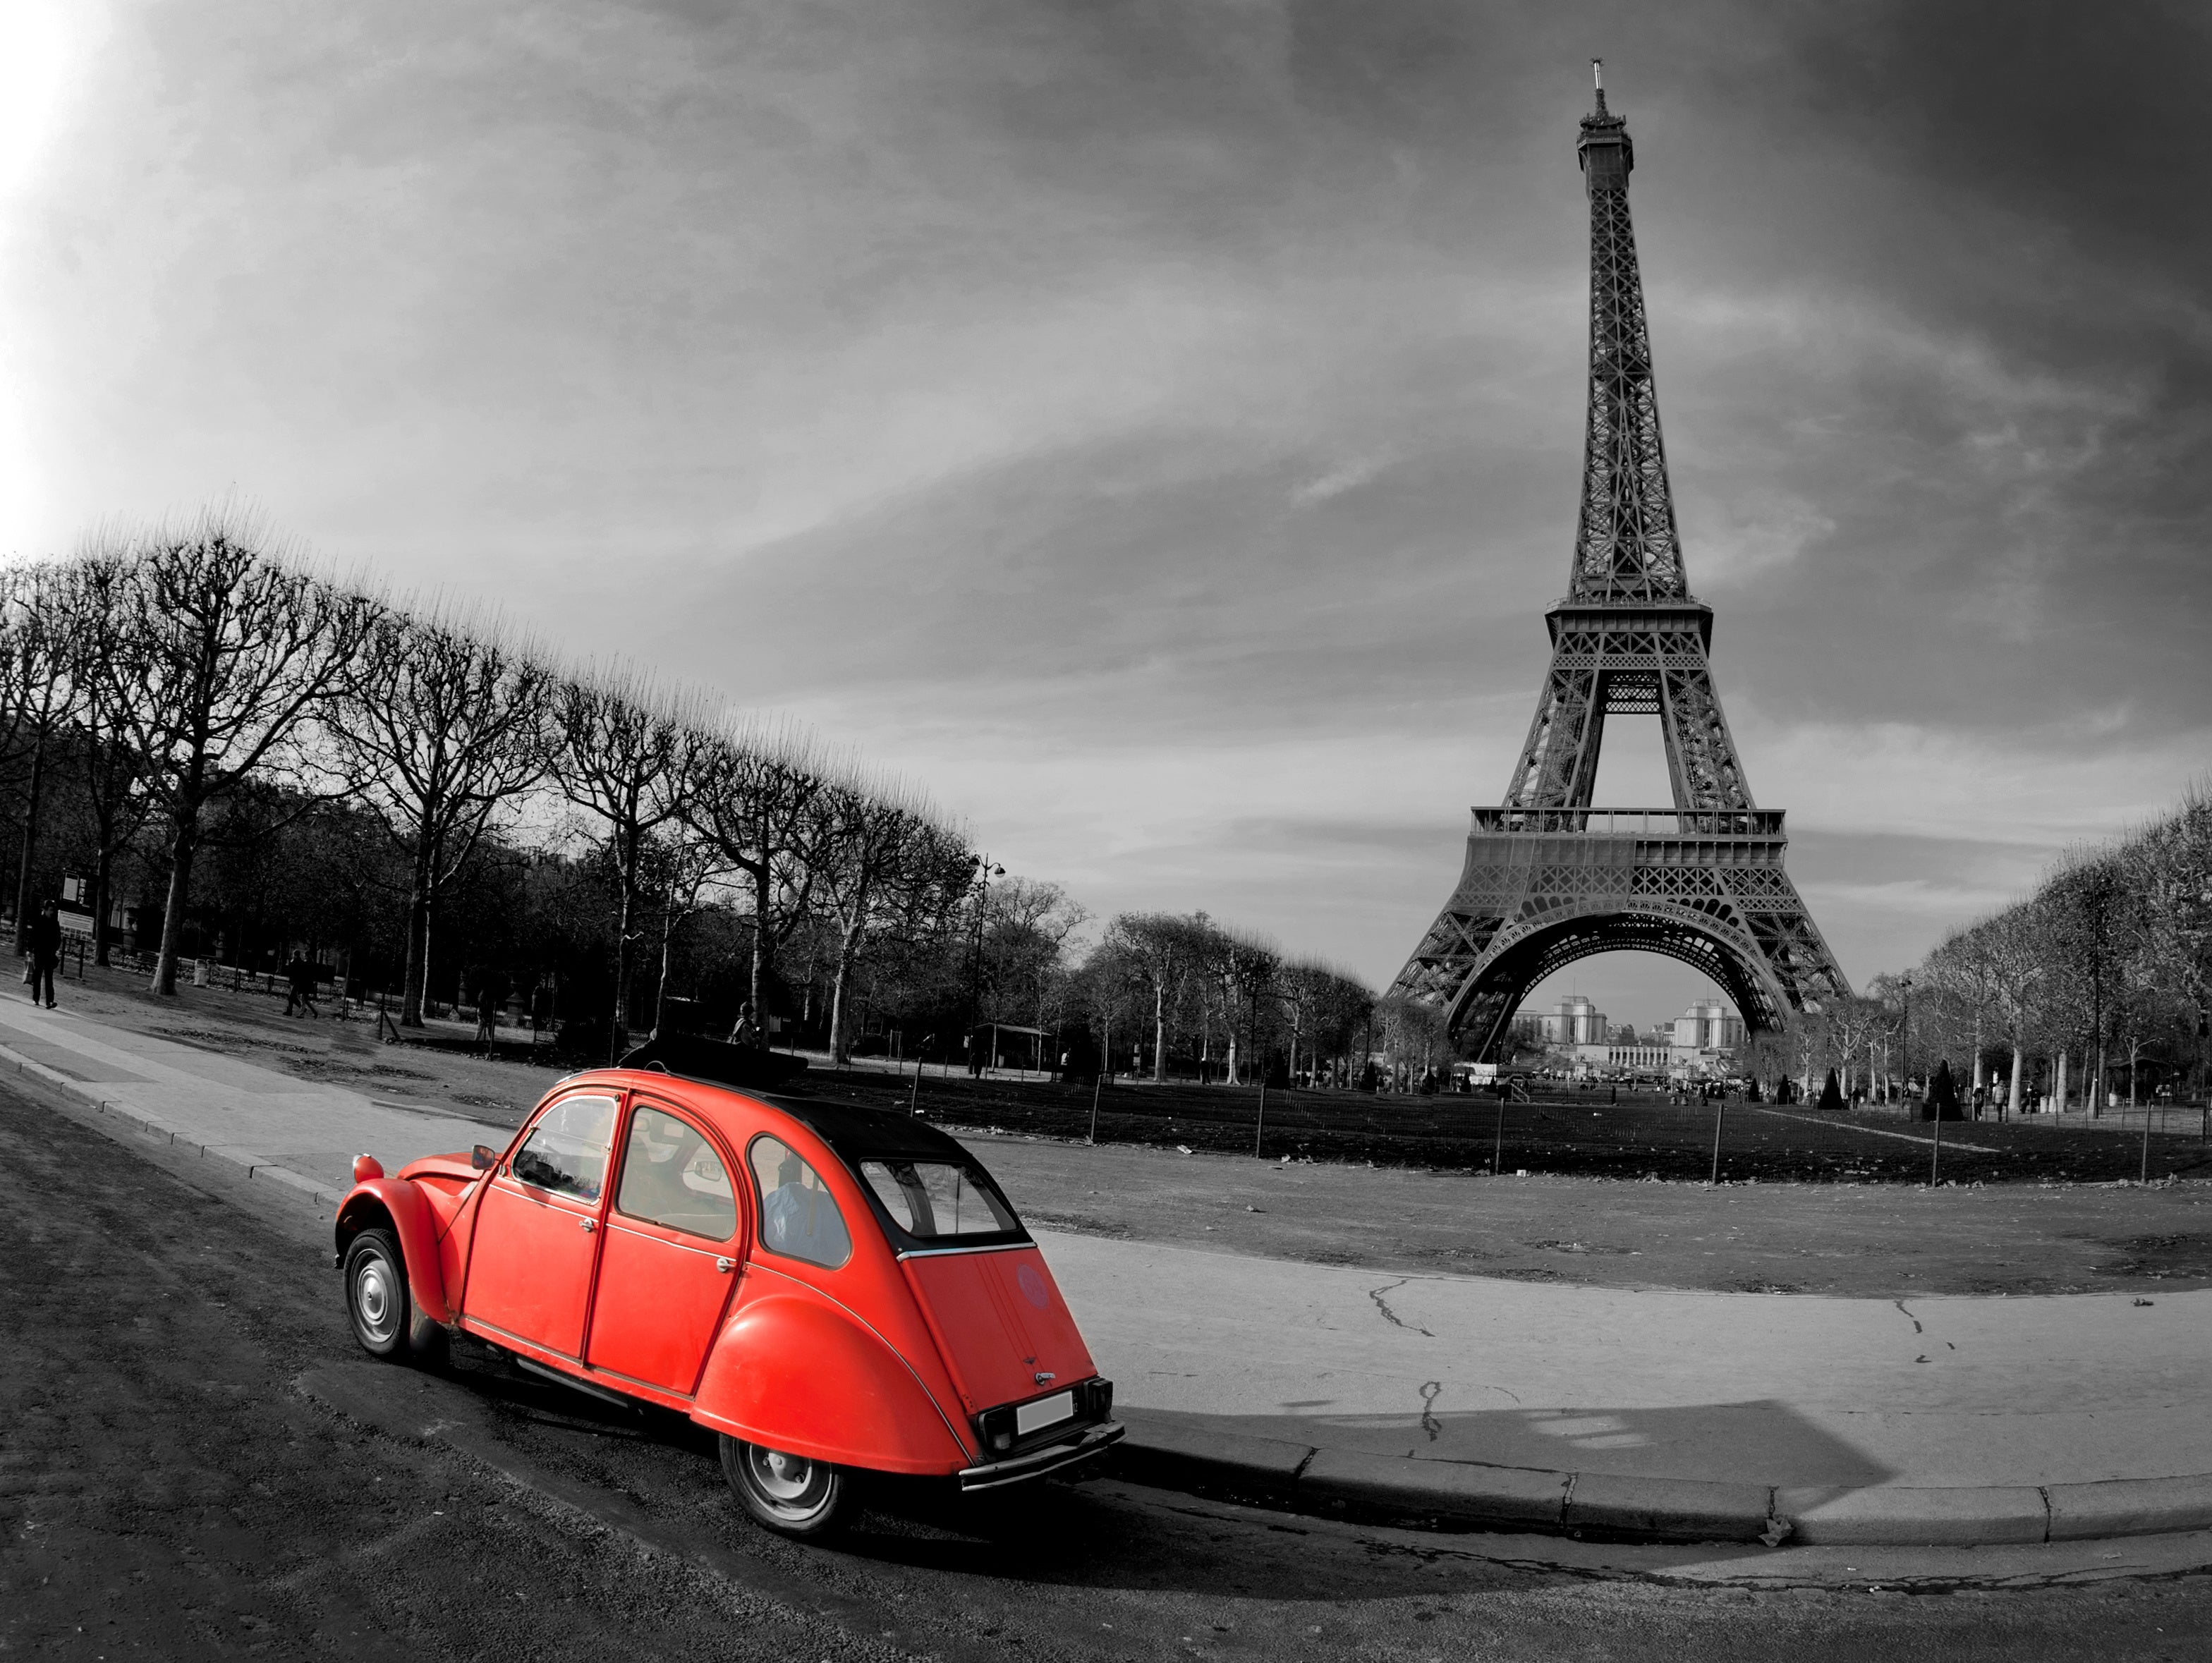 Eiffel Tower and red car in Paris